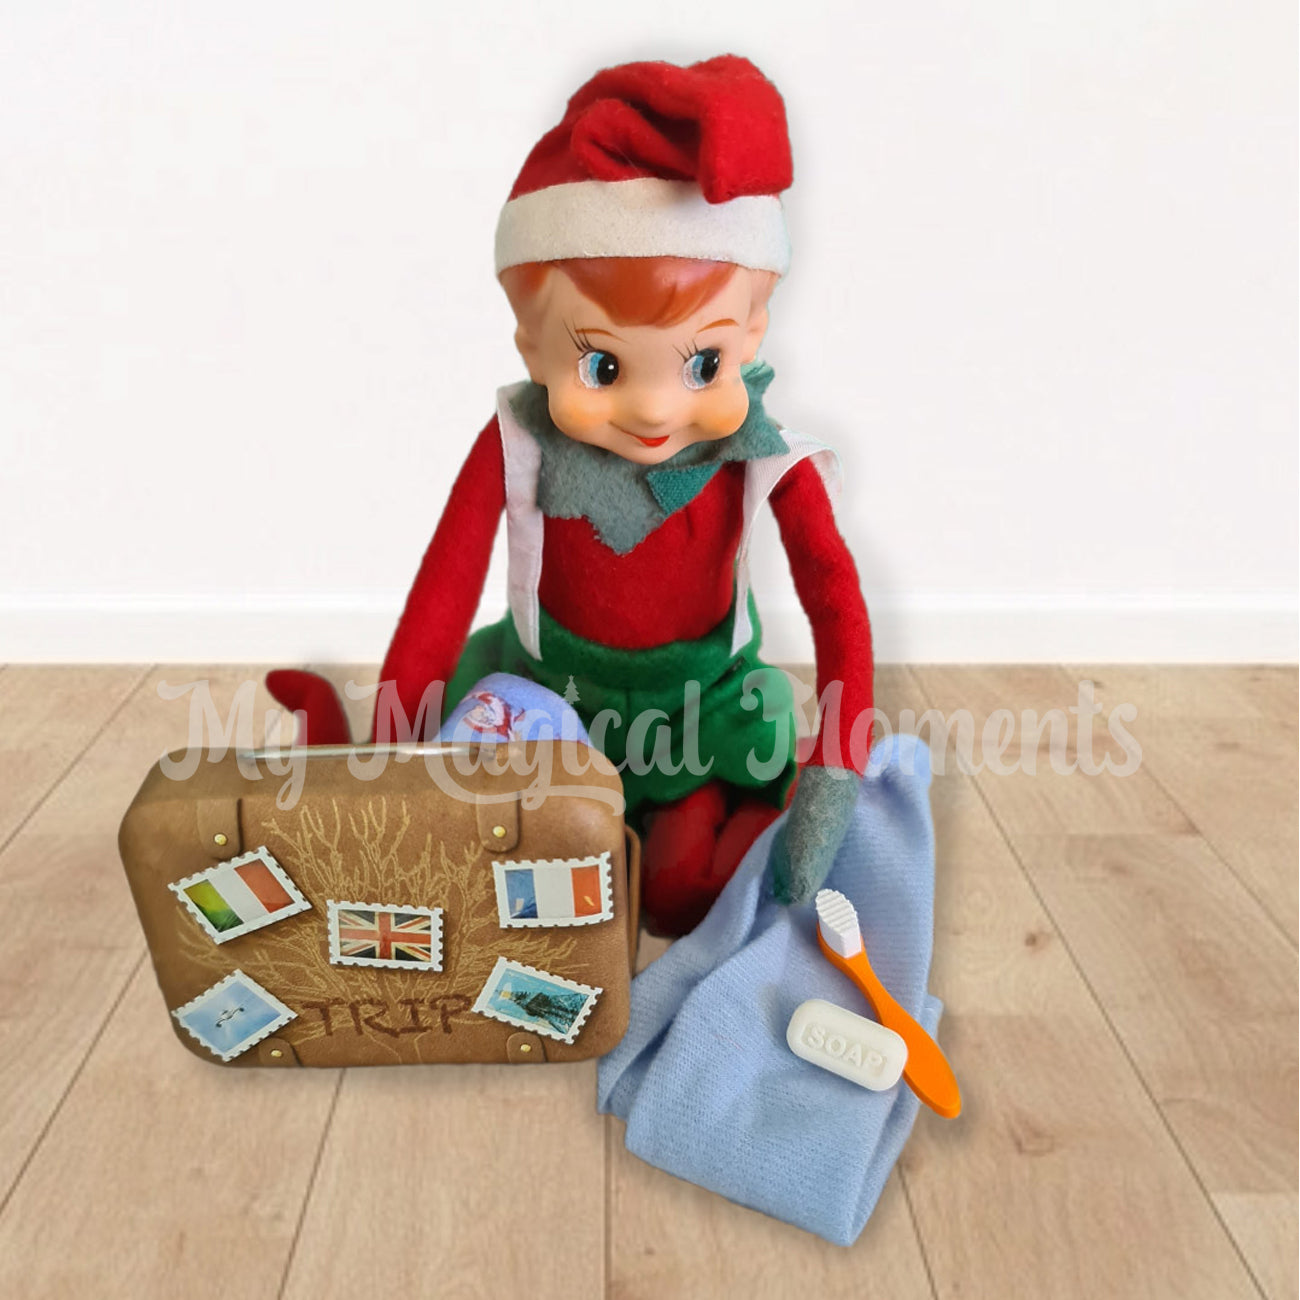 Elf packing suitcase with clothes and miniature toothbrush